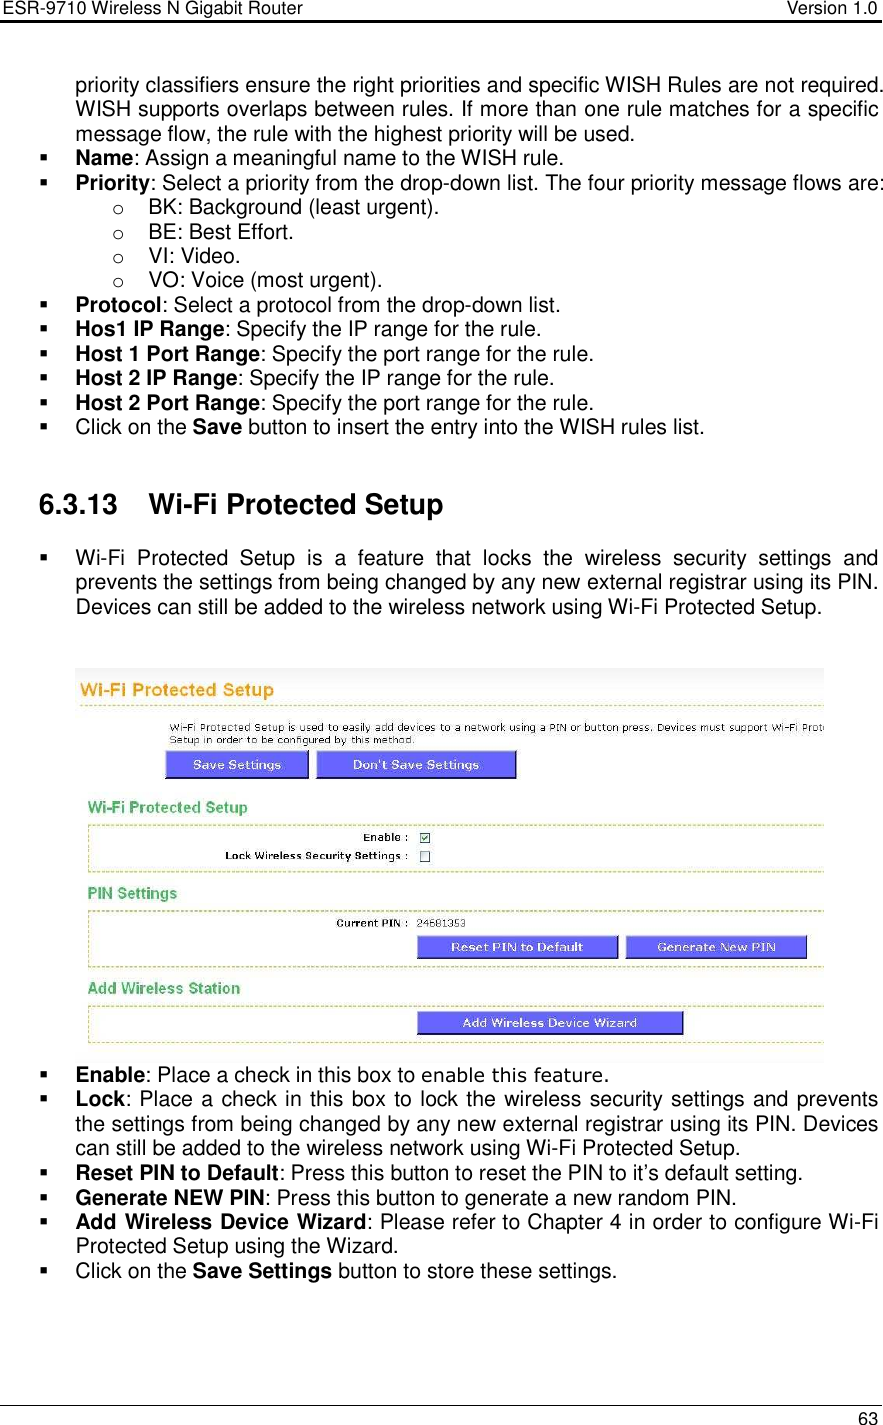 ESR-9710 Wireless N Gigabit Router                                    Version 1.0    63  priority classifiers ensure the right priorities and specific WISH Rules are not required. WISH supports overlaps between rules. If more than one rule matches for a specific message flow, the rule with the highest priority will be used.   Name: Assign a meaningful name to the WISH rule.    Priority: Select a priority from the drop-down list. The four priority message flows are:  o  BK: Background (least urgent).  o  BE: Best Effort.  o  VI: Video.  o  VO: Voice (most urgent).   Protocol: Select a protocol from the drop-down list.   Hos1 IP Range: Specify the IP range for the rule.    Host 1 Port Range: Specify the port range for the rule.  Host 2 IP Range: Specify the IP range for the rule.  Host 2 Port Range: Specify the port range for the rule.   Click on the Save button to insert the entry into the WISH rules list.     6.3.13  Wi-Fi Protected Setup   Wi-Fi  Protected  Setup  is  a  feature  that  locks  the  wireless  security  settings  and prevents the settings from being changed by any new external registrar using its PIN. Devices can still be added to the wireless network using Wi-Fi Protected Setup.     Enable: Place a check in this box to enable this feature.  Lock: Place a check in this box to lock the wireless security settings and prevents the settings from being changed by any new external registrar using its PIN. Devices can still be added to the wireless network using Wi-Fi Protected Setup.  Reset PIN to Default: Press this button to reset the PIN to it’s default setting.  Generate NEW PIN: Press this button to generate a new random PIN.   Add Wireless Device Wizard: Please refer to Chapter 4 in order to configure Wi-Fi Protected Setup using the Wizard.    Click on the Save Settings button to store these settings.    